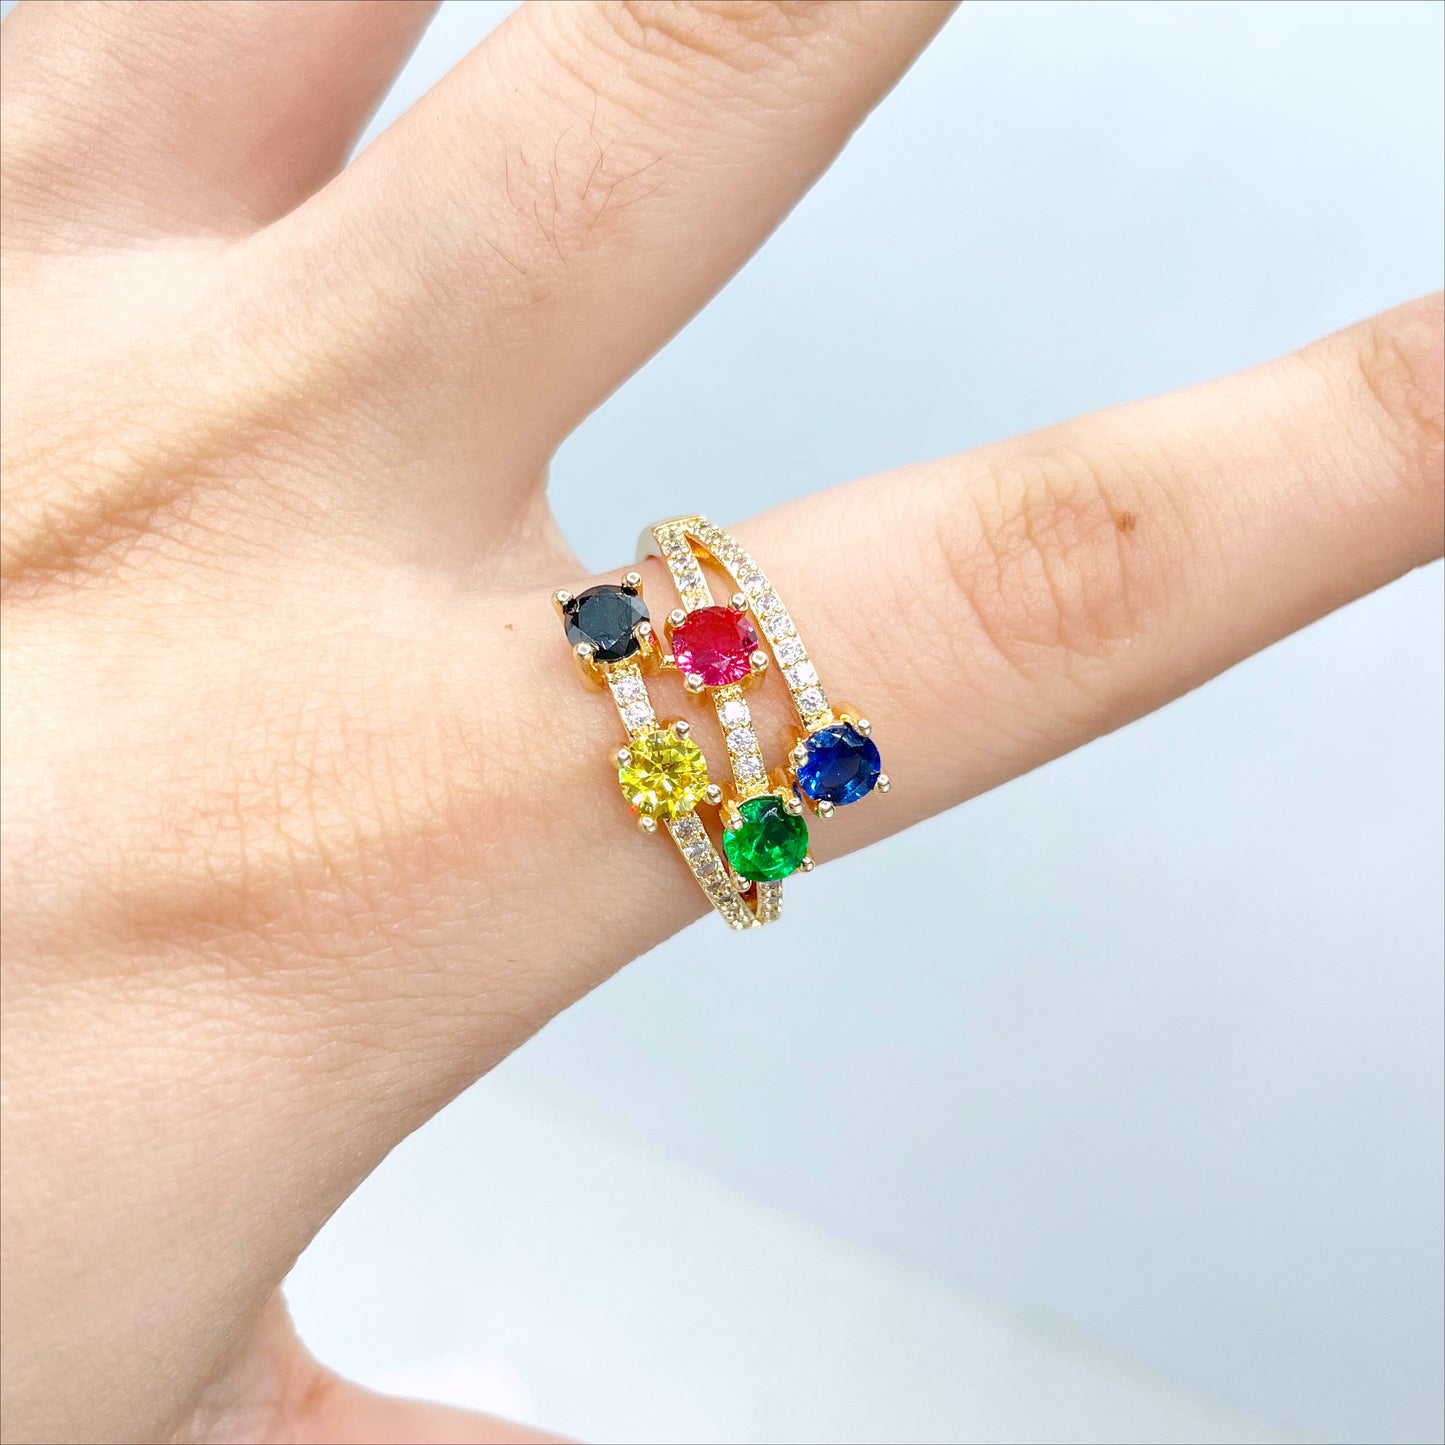 18k Gold Filled Clear Micro Cubic Zirconia and Colored CZ Pink, Blue, Yellow, Green & Black Ring, Wholesale Jewelry Making Supplies